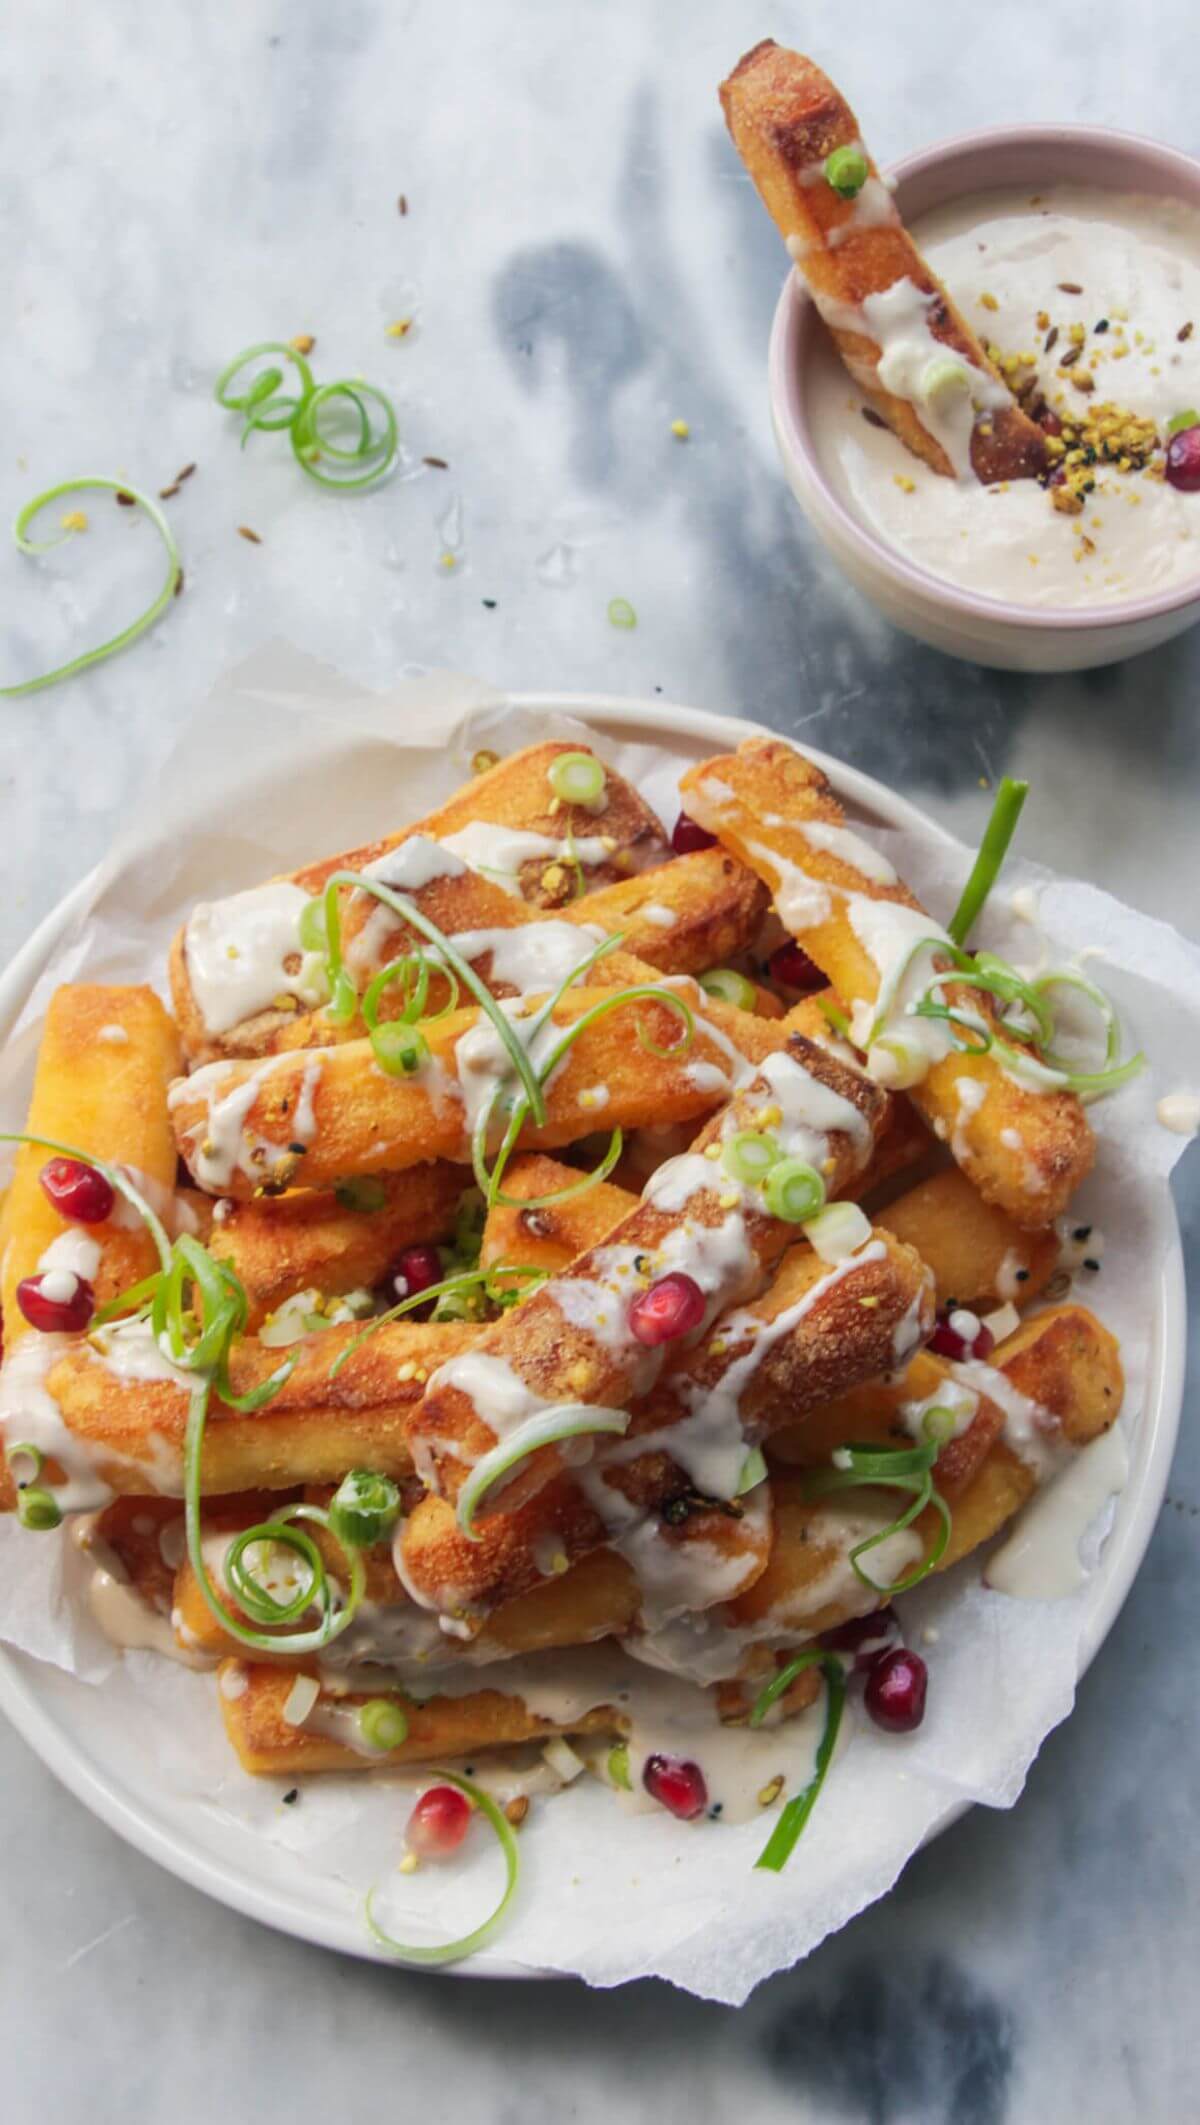 Crispy halloumi fries piled onto a small white plate and drizzled with tahini sauce, spring onion and pomegranate seeds with fry in a small bowl of tahini sauce on the side.